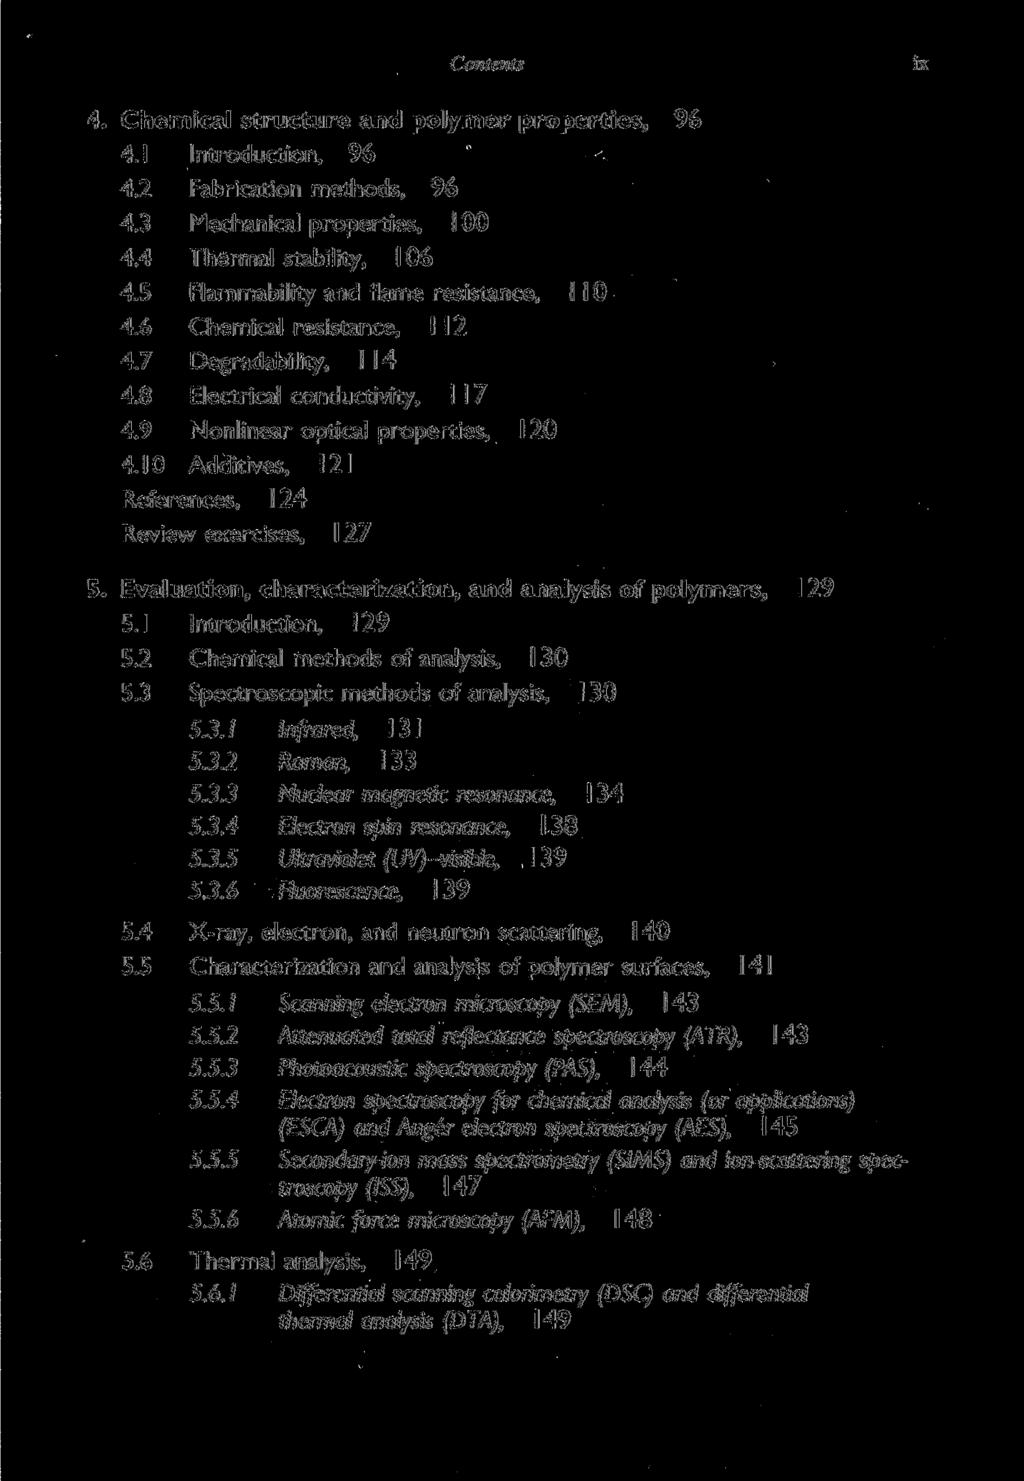 Contents ix 4. Chemical structure and polymer properties, 96 4.1 Introduction, 96 4.2 Fabrication methods, 96 4.3 Mechanical properties, 100 4.4 Thermal stability, 106 4.